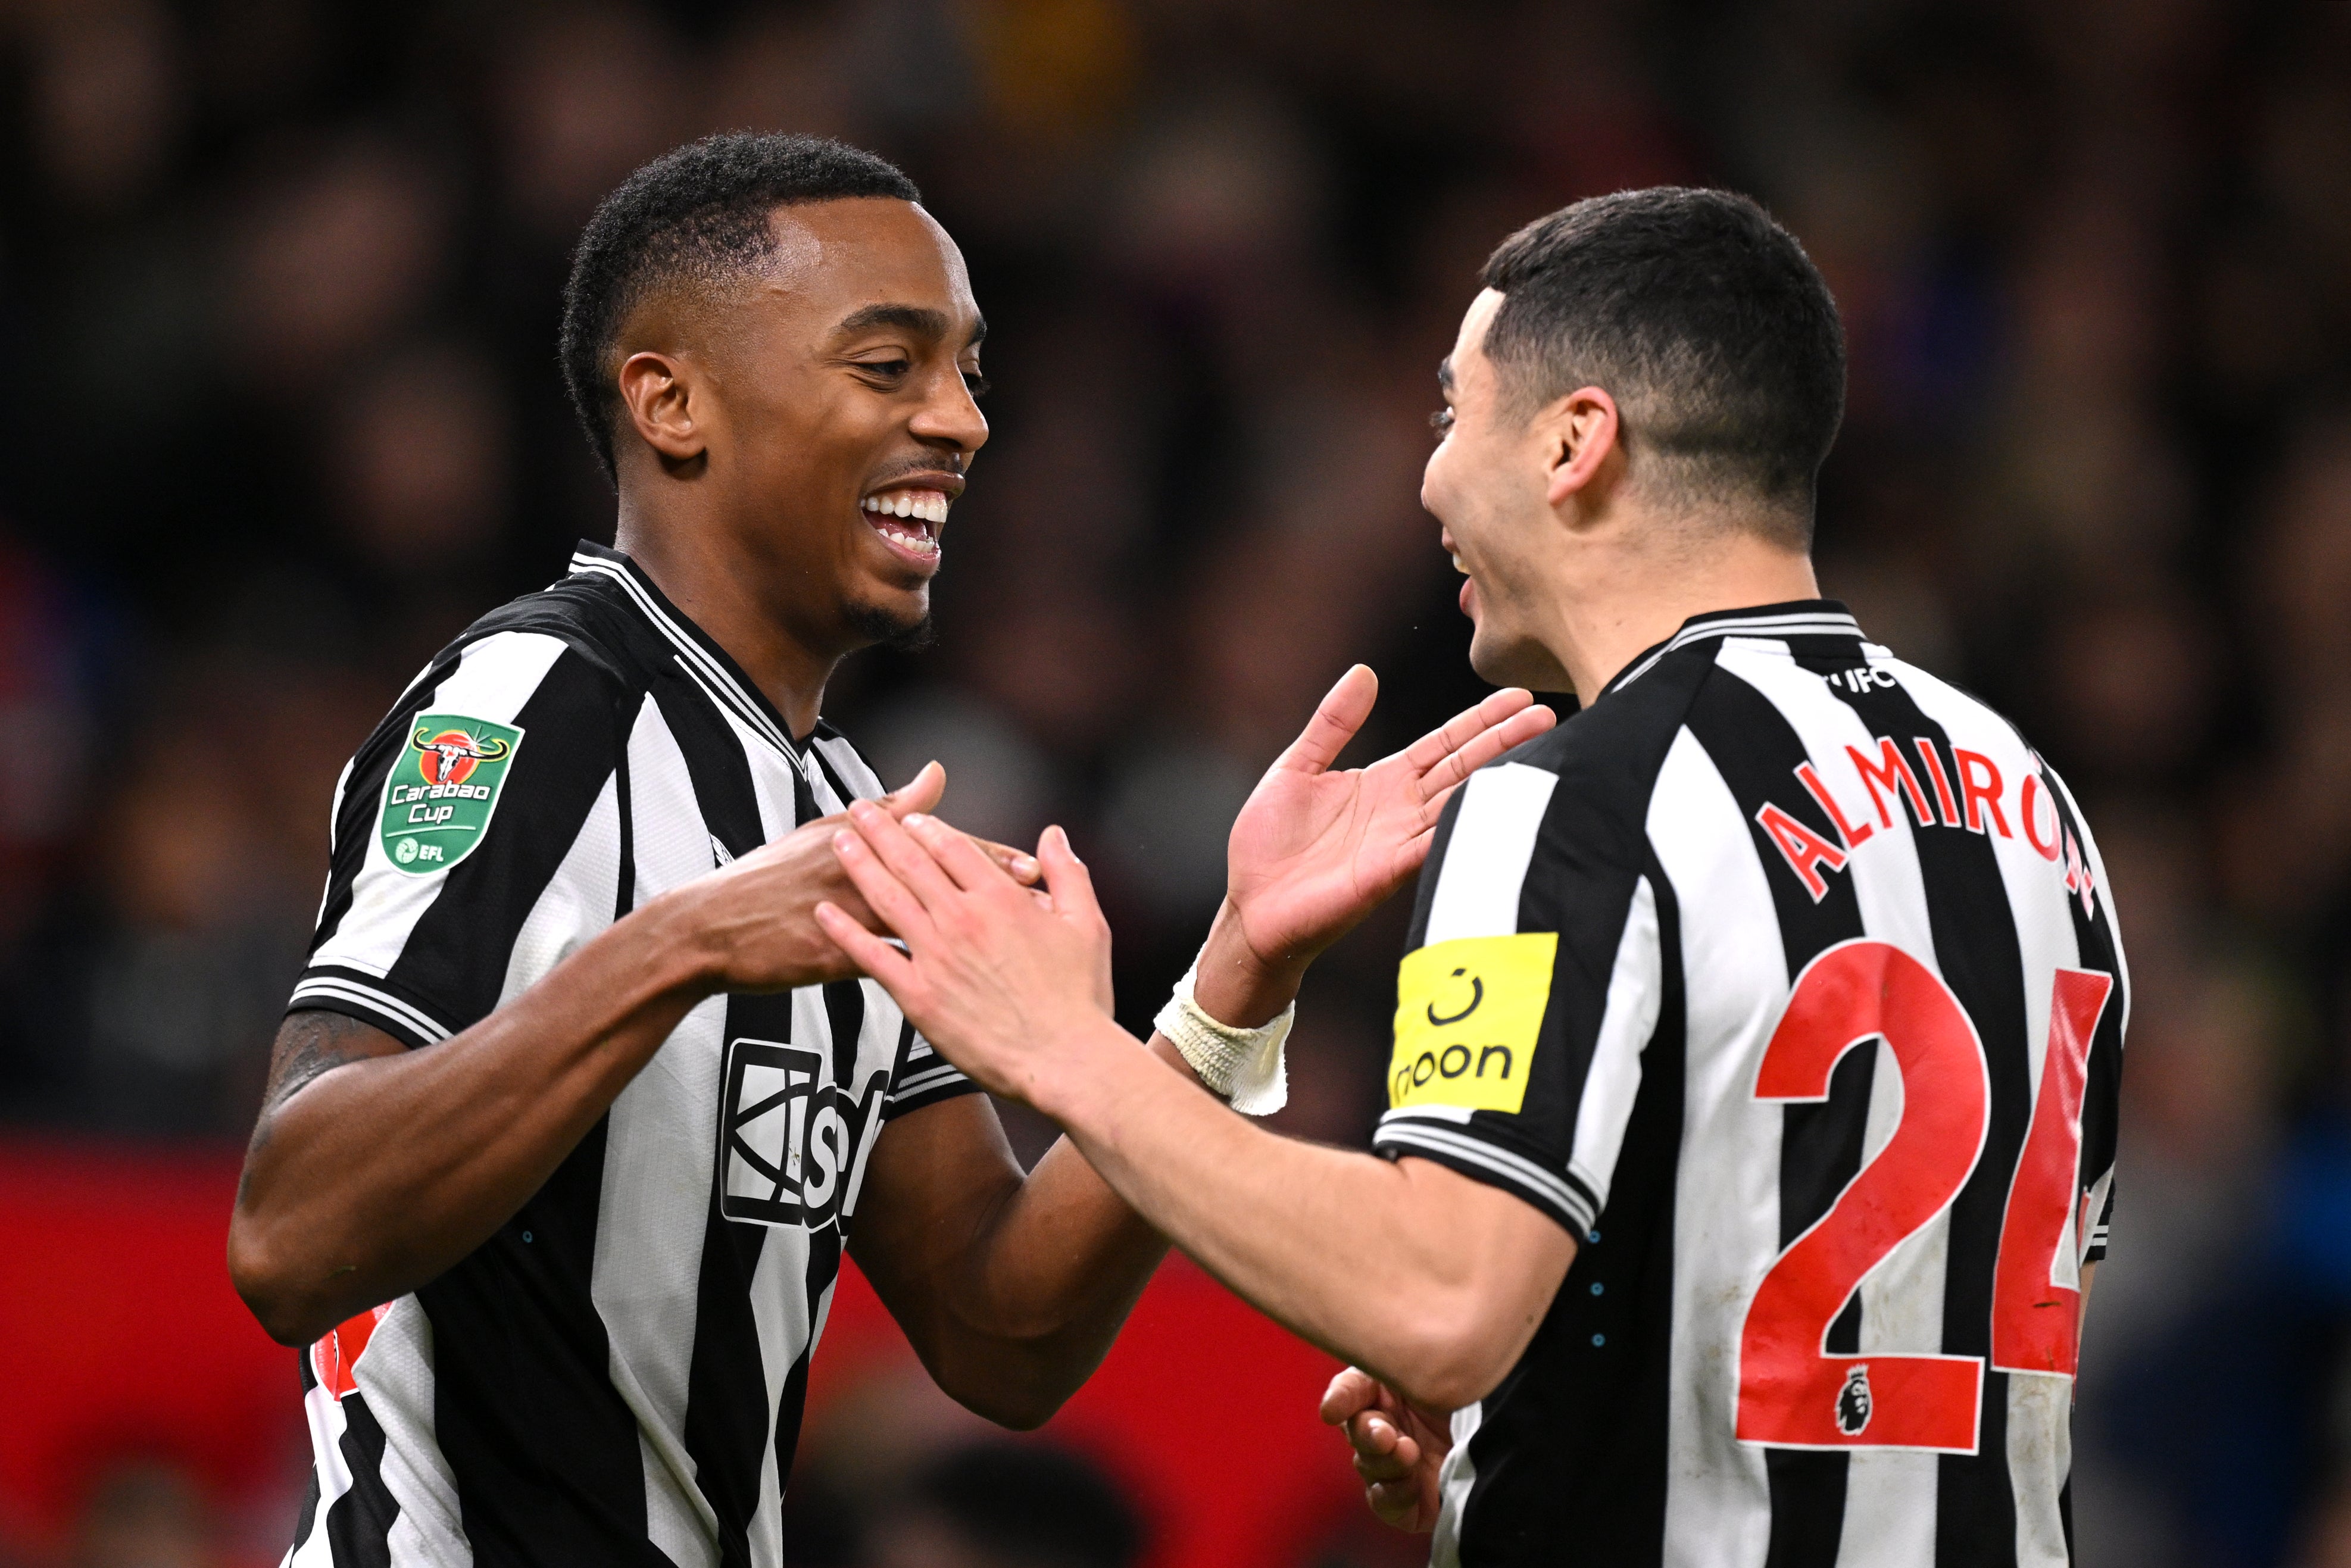 Joe Willock and Miguel Almiron both scored at Old Trafford as Newcastle cruised to victory